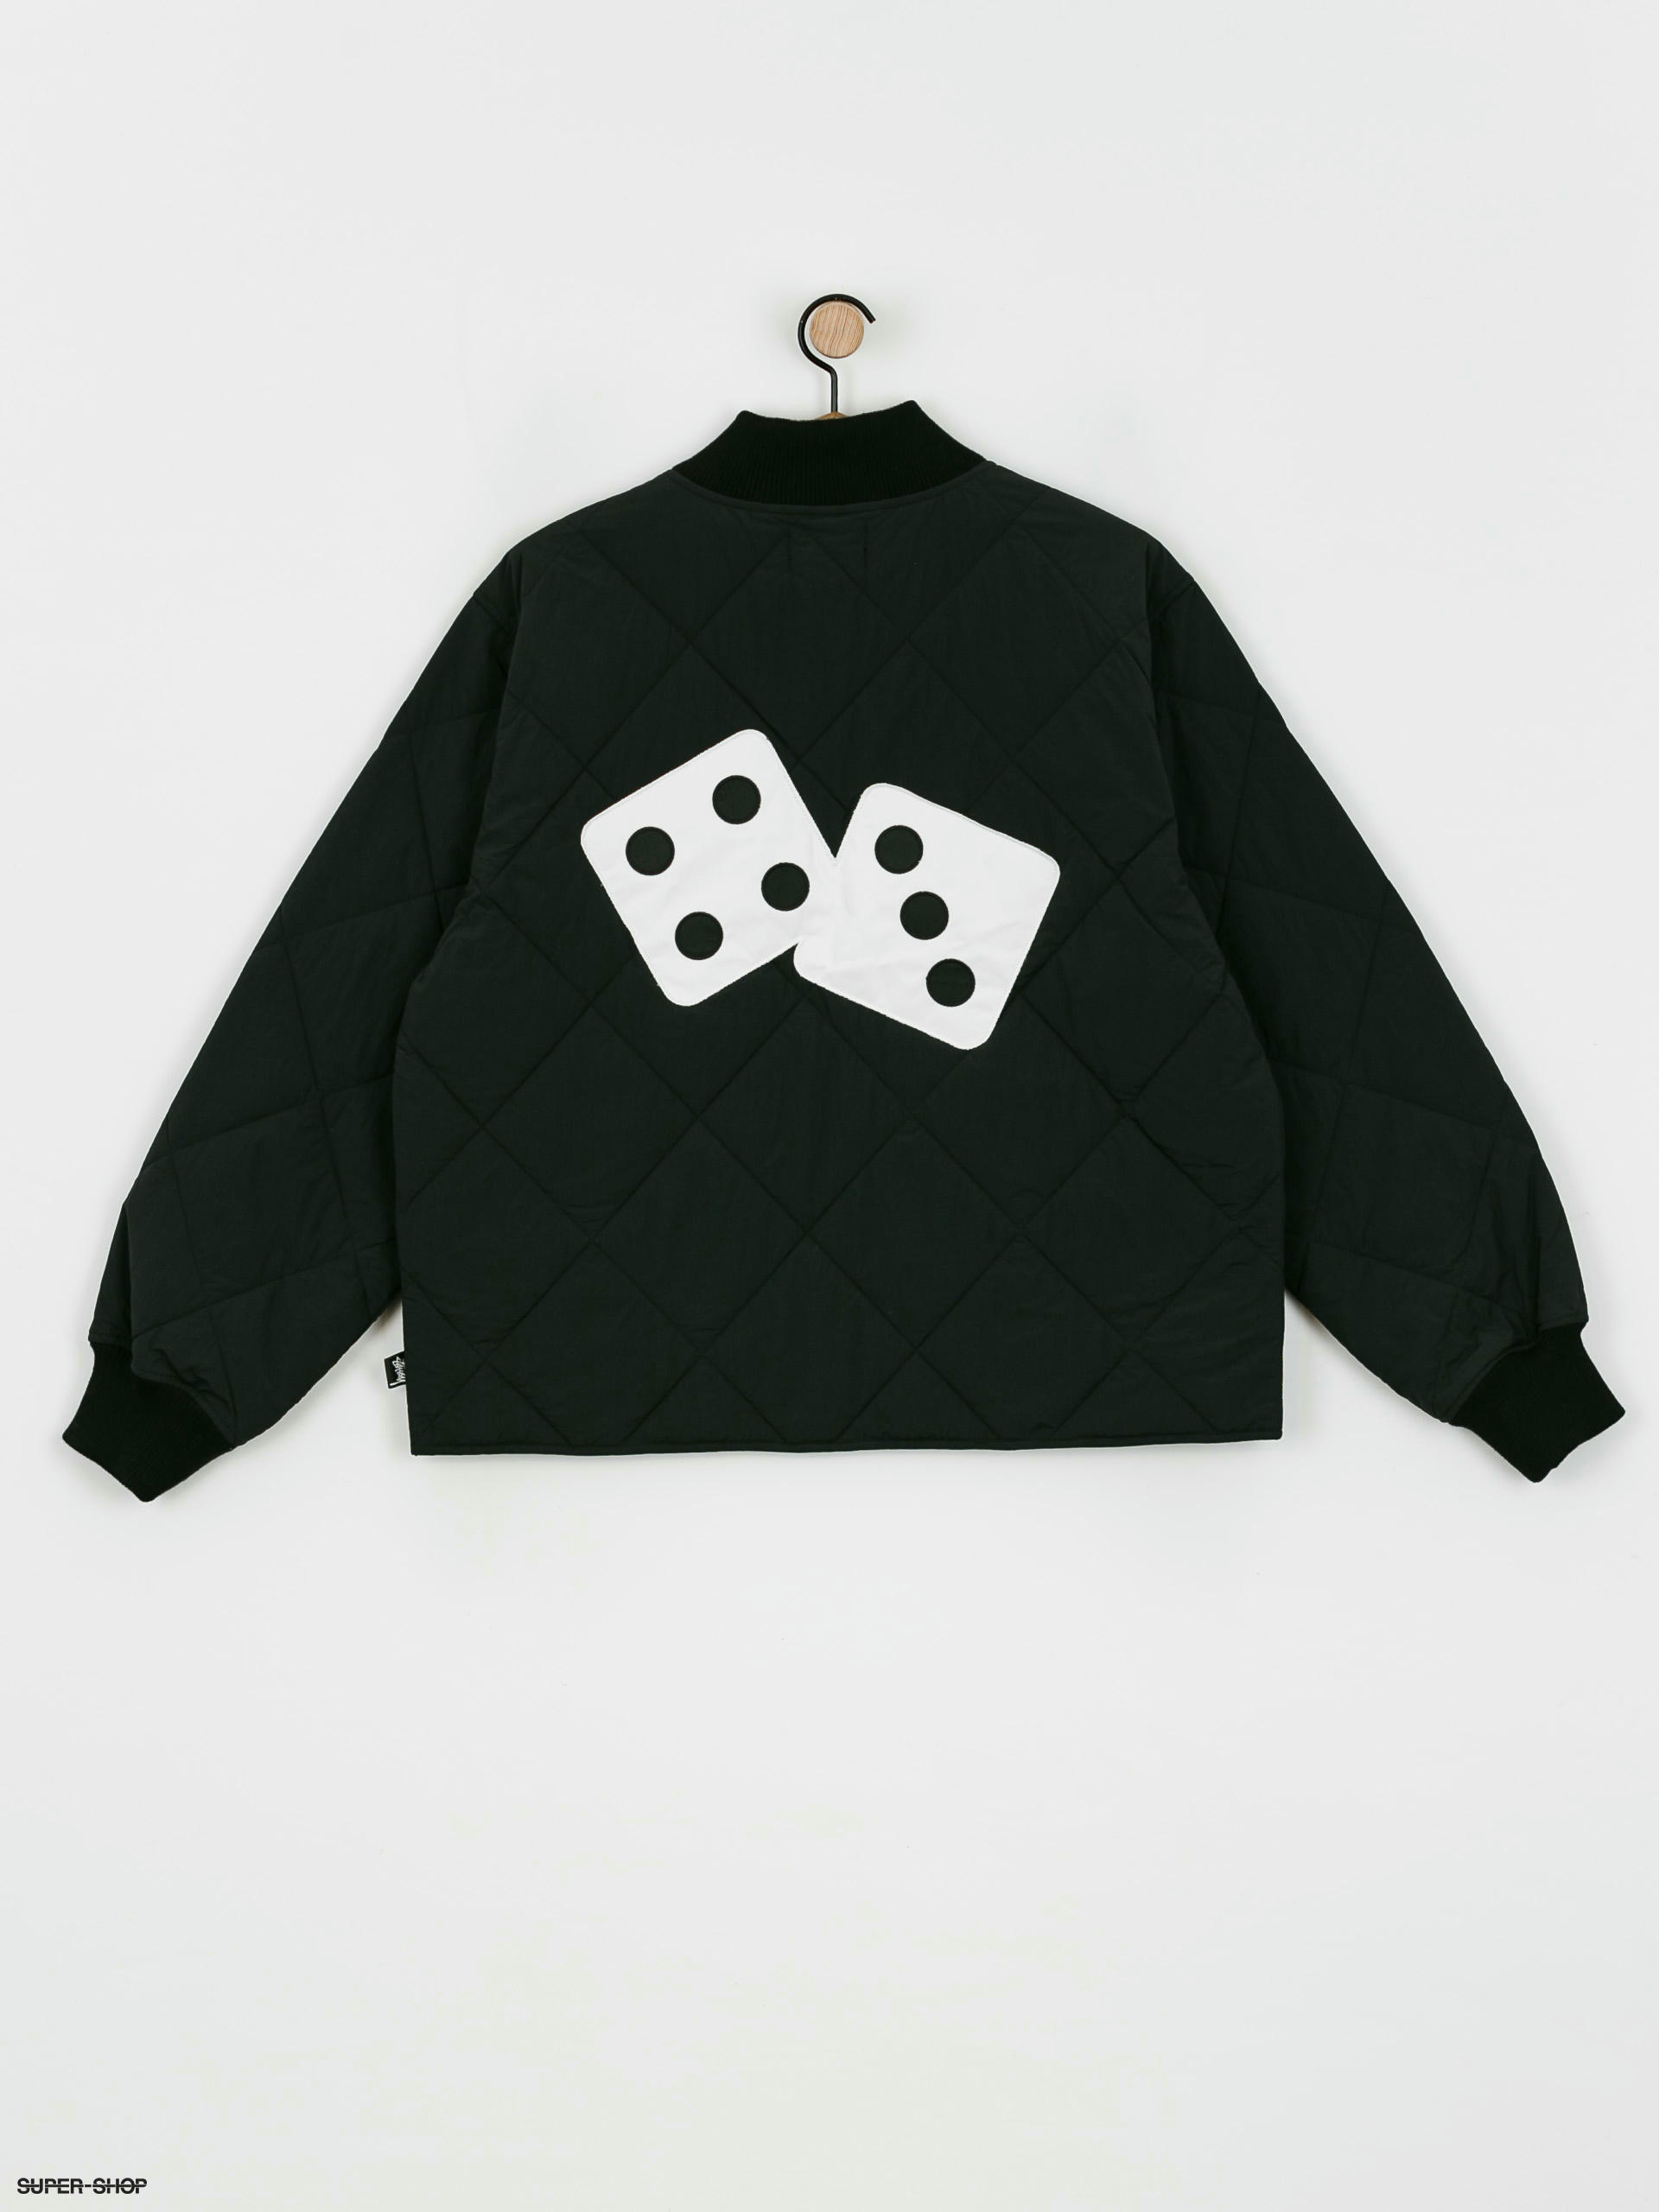 STUSSY DICE QUILTED LINER JACKET | brownscomm.com